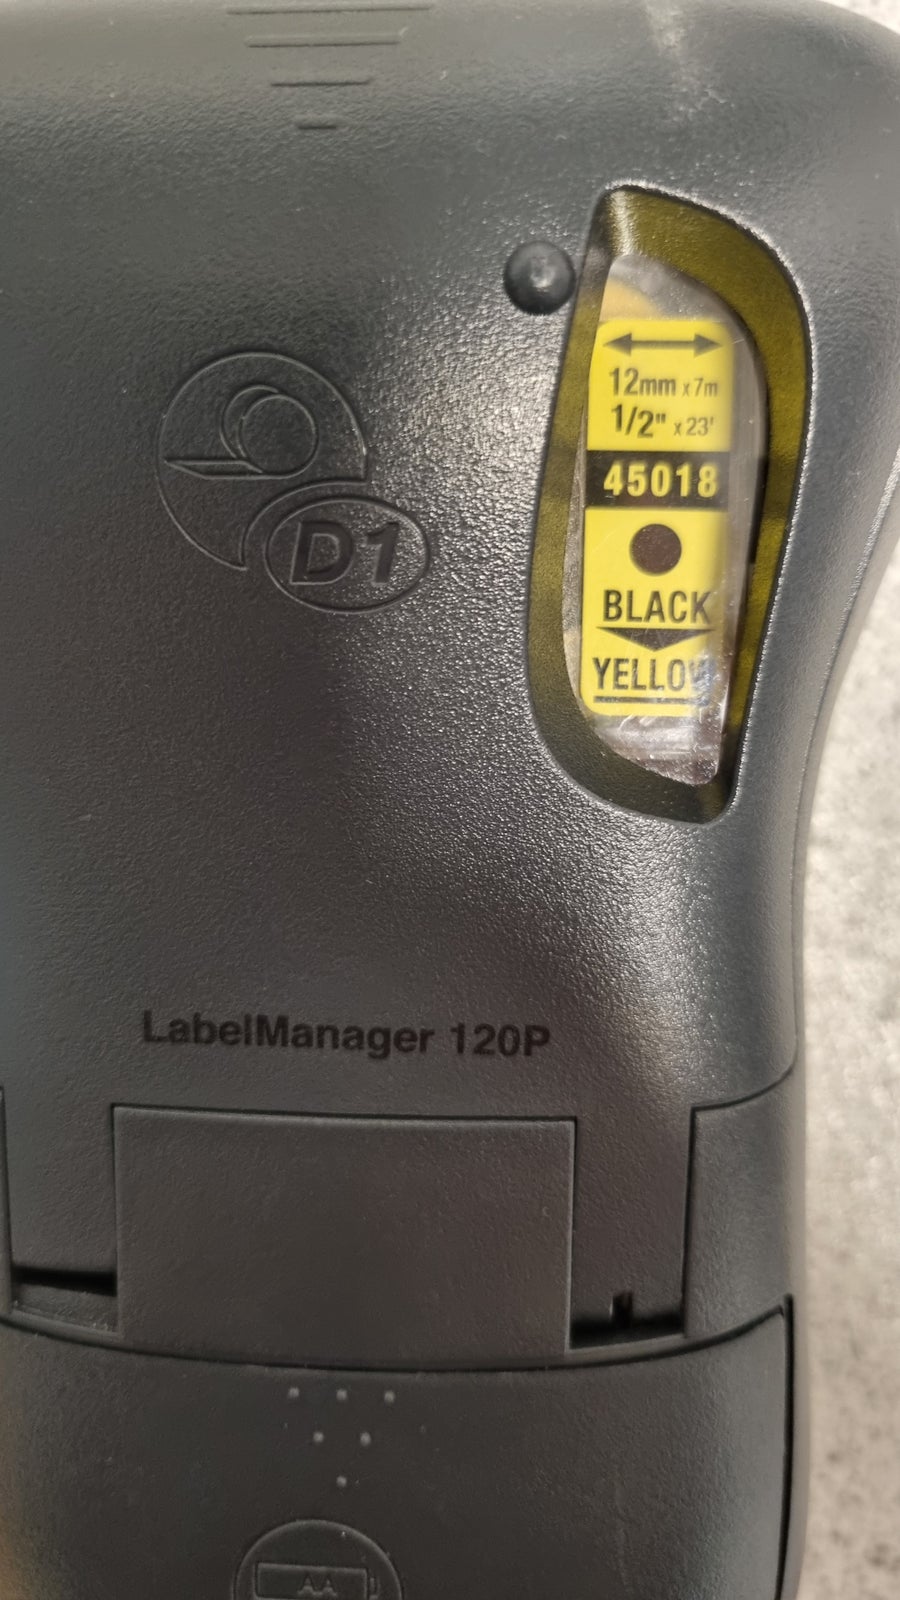 Dymo Labelmanager 120P